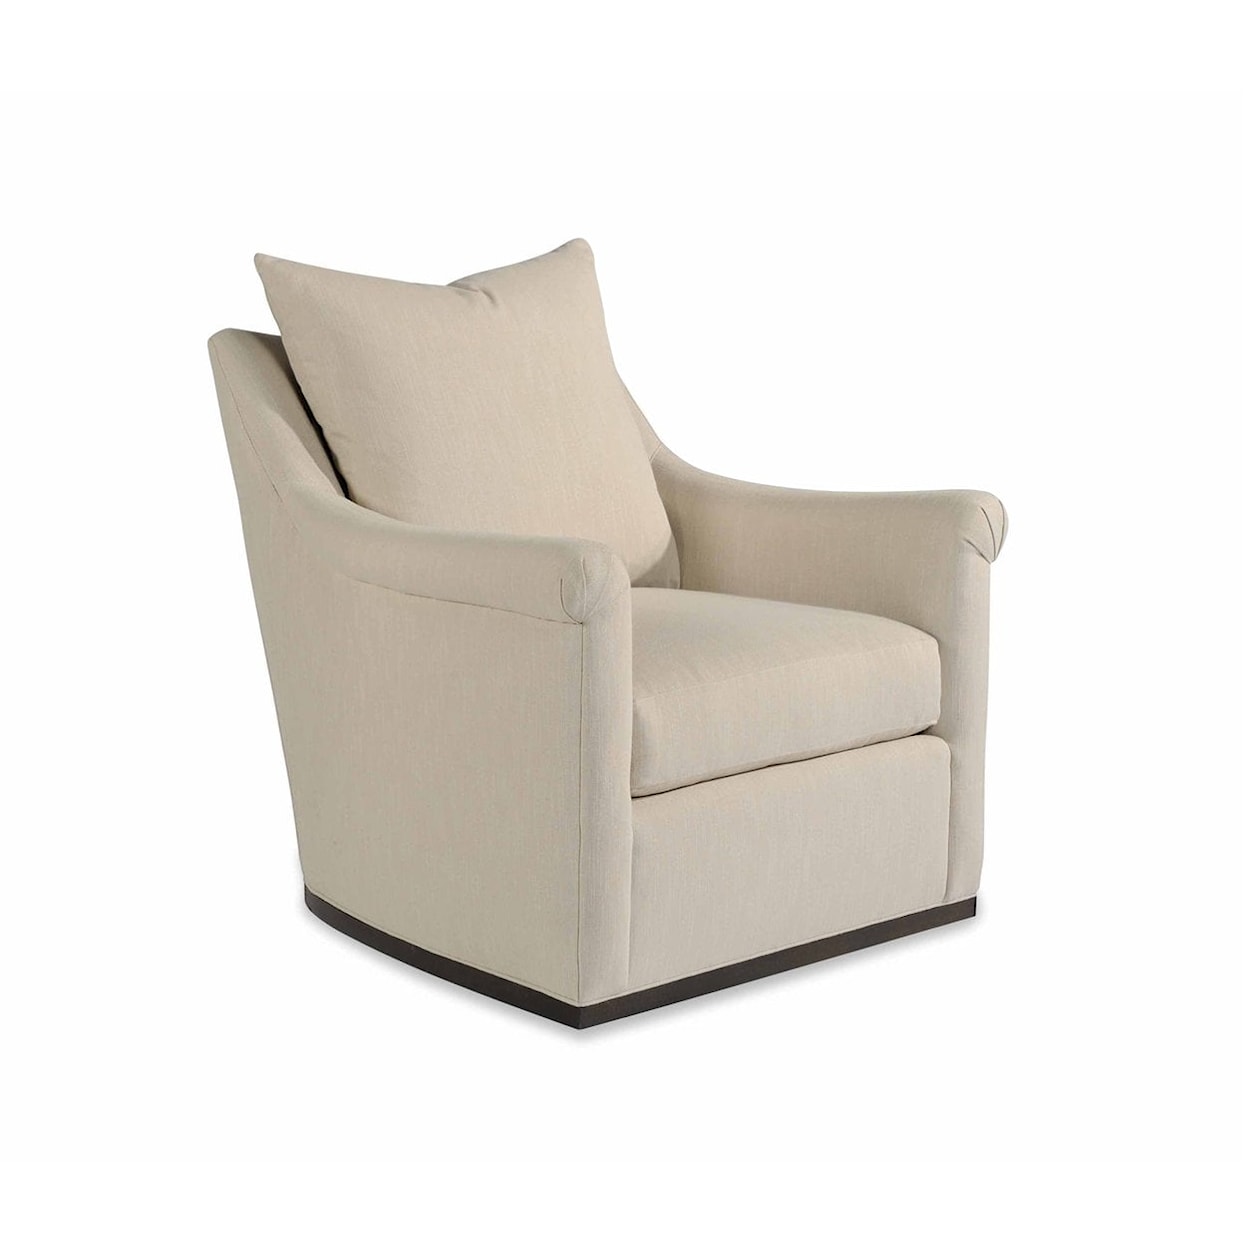 Taylor King Swivel Chairs HOLLY SWIVEL CHAIR